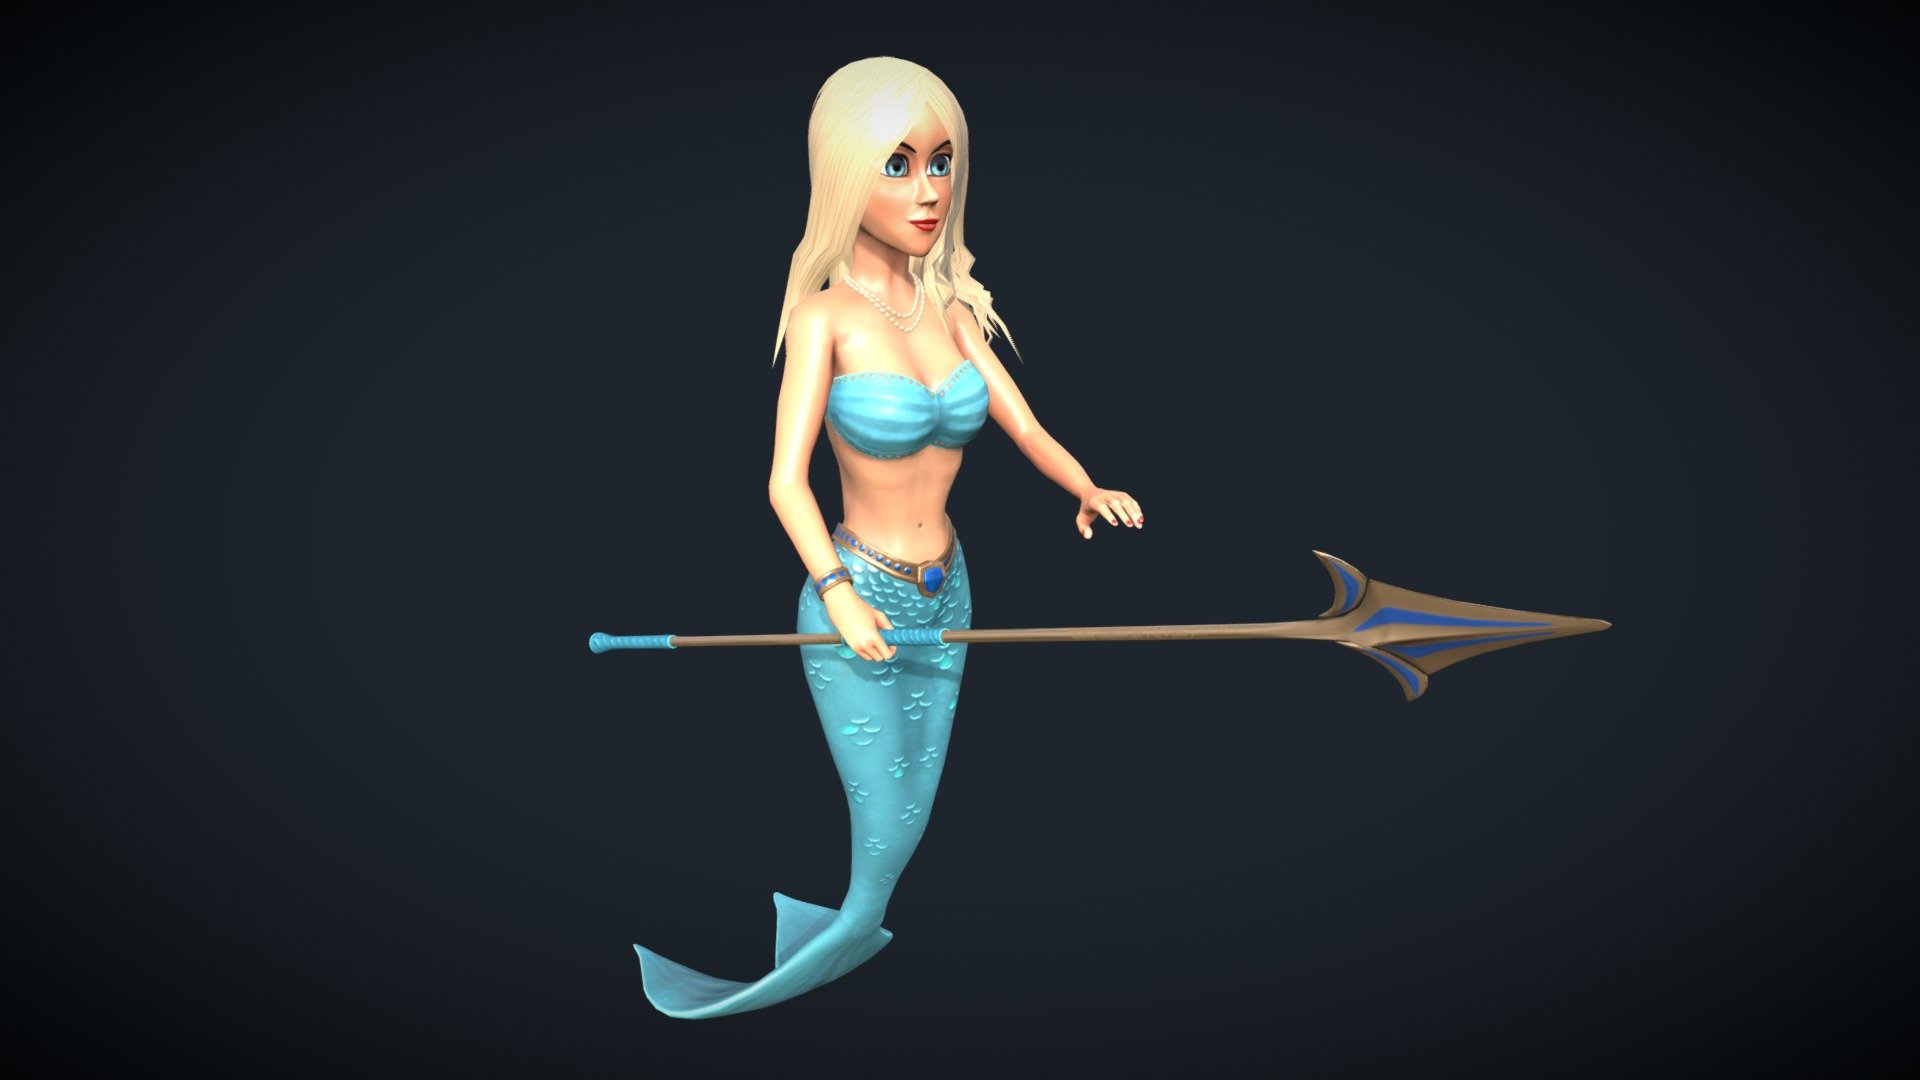 Rigged, PBR textured and animated stylized Mermaid model.
4K textures. Spear is sperate model 3d model